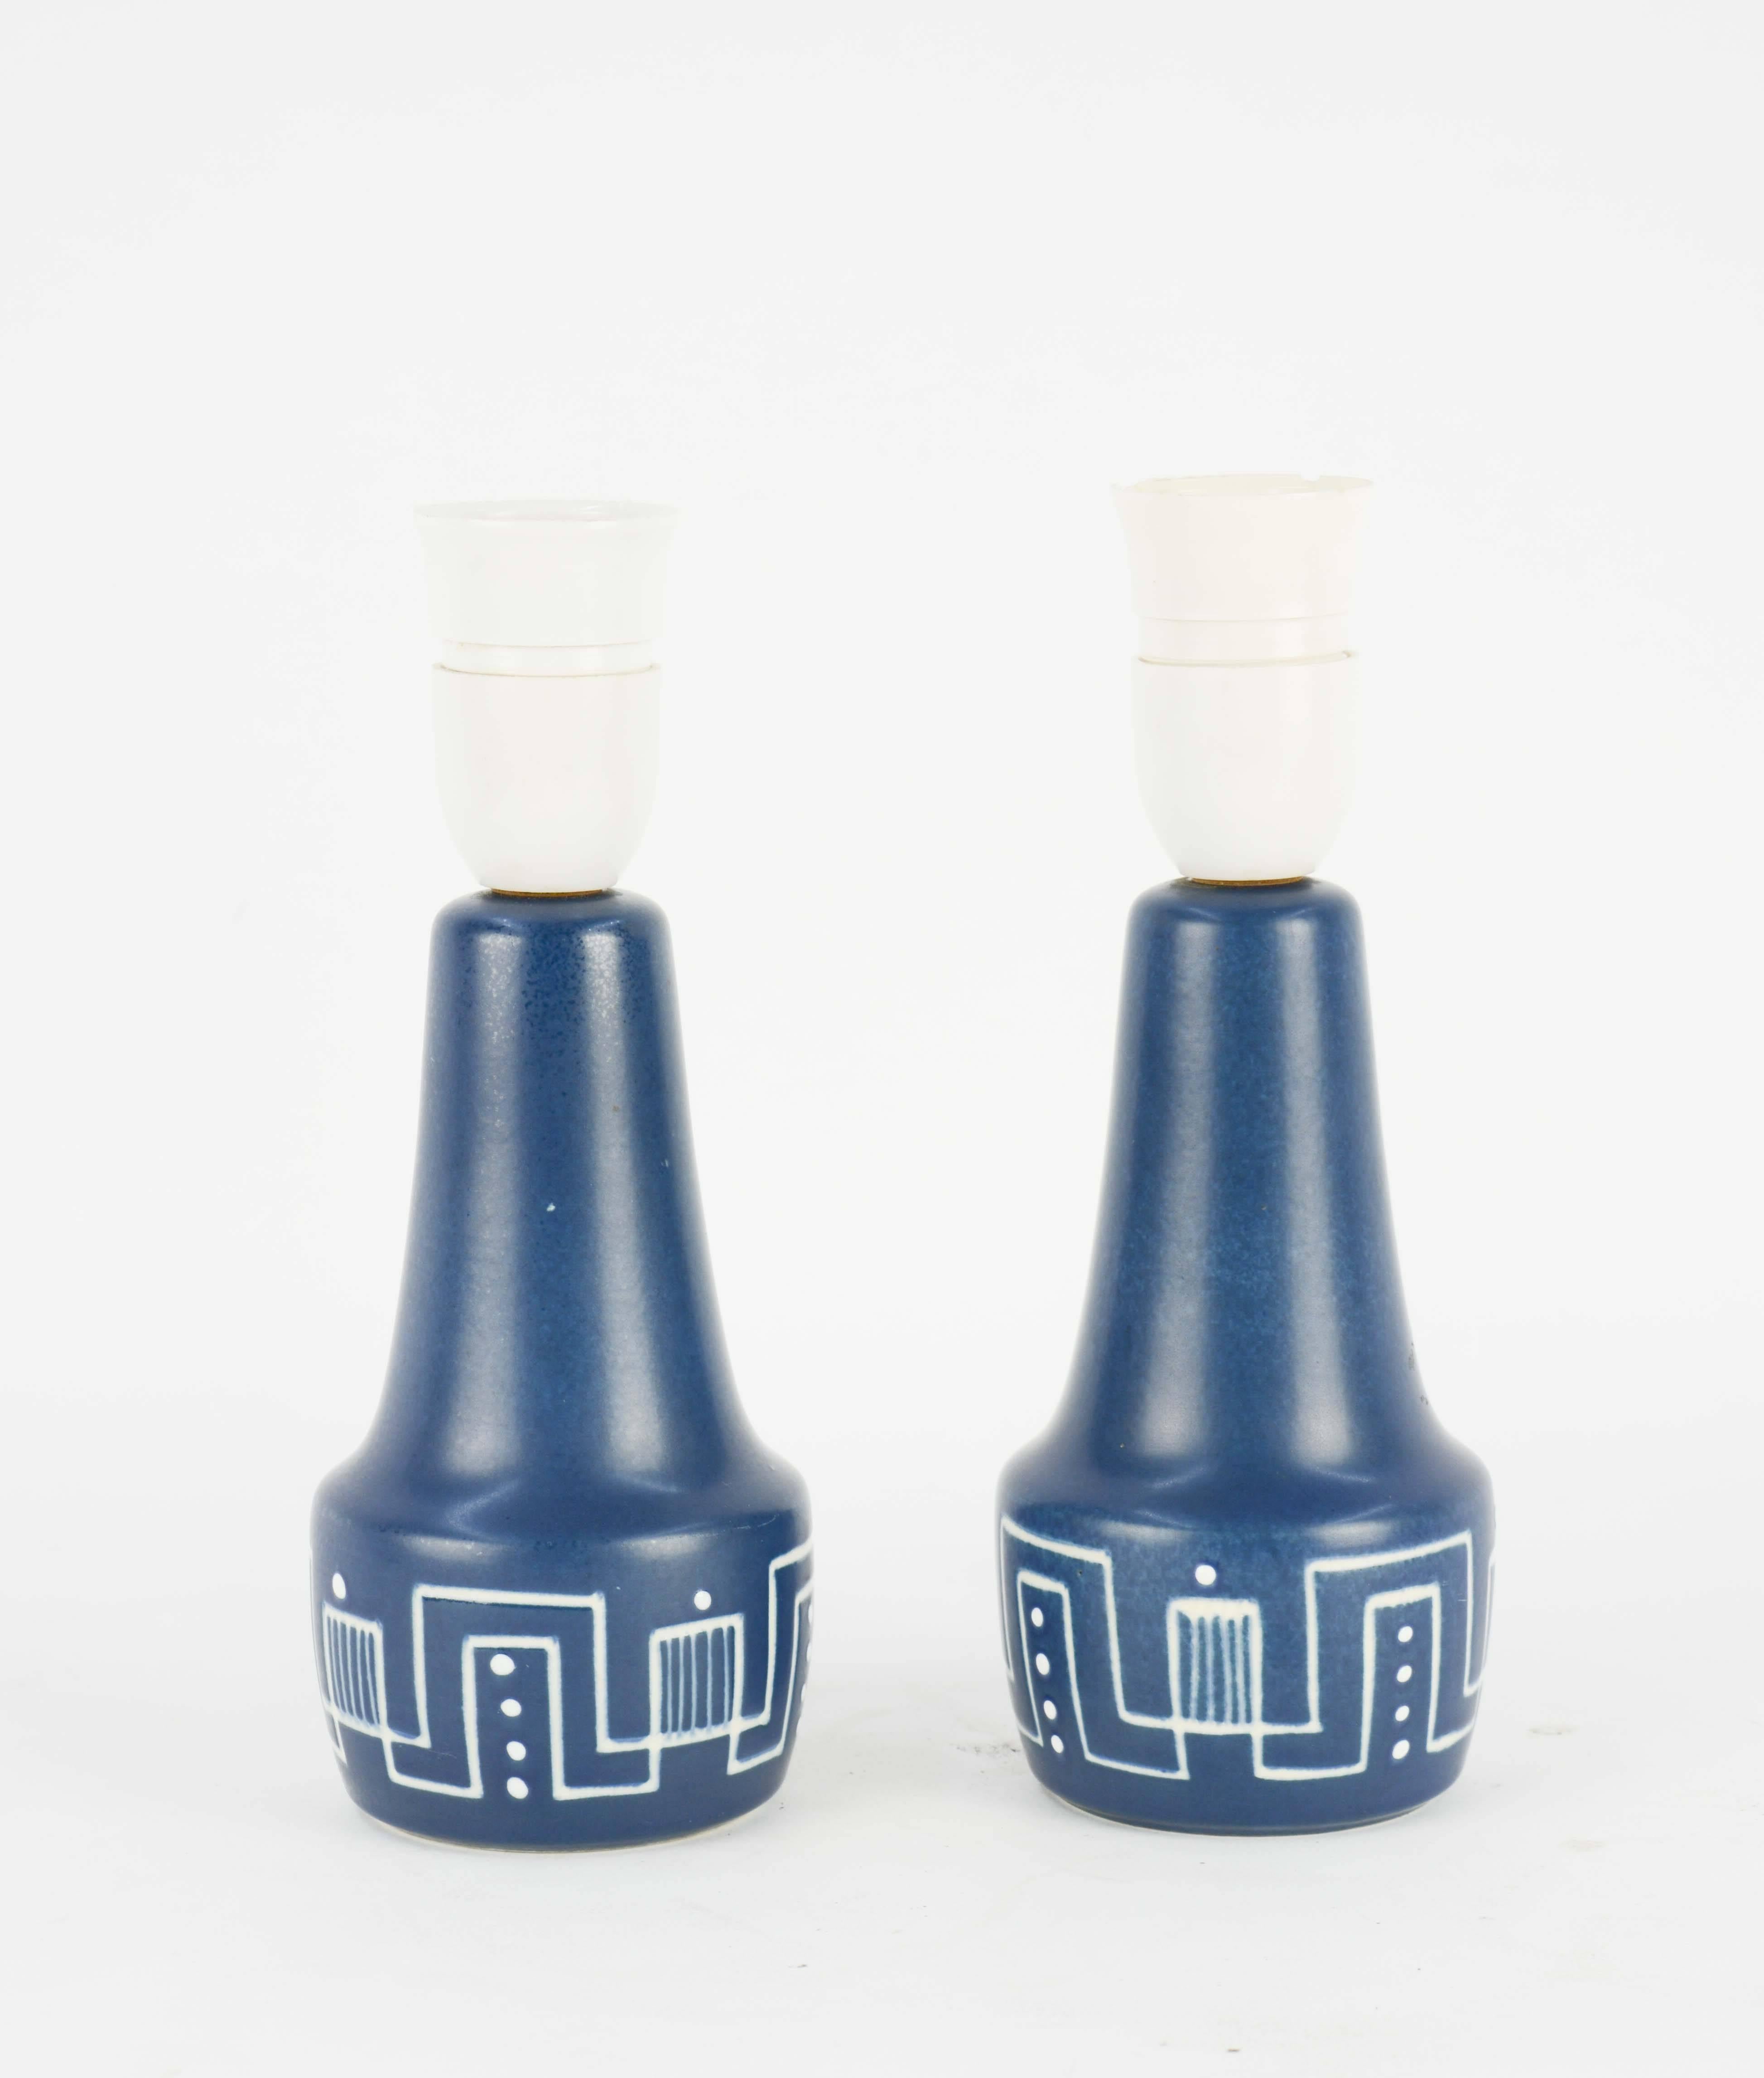 A wondersul blue glaze and etched design pattern on these Rigmor Nielsen lamps for Soholm Stentj of Denmark. They are sold without shades and can be rewired for an additional cost.